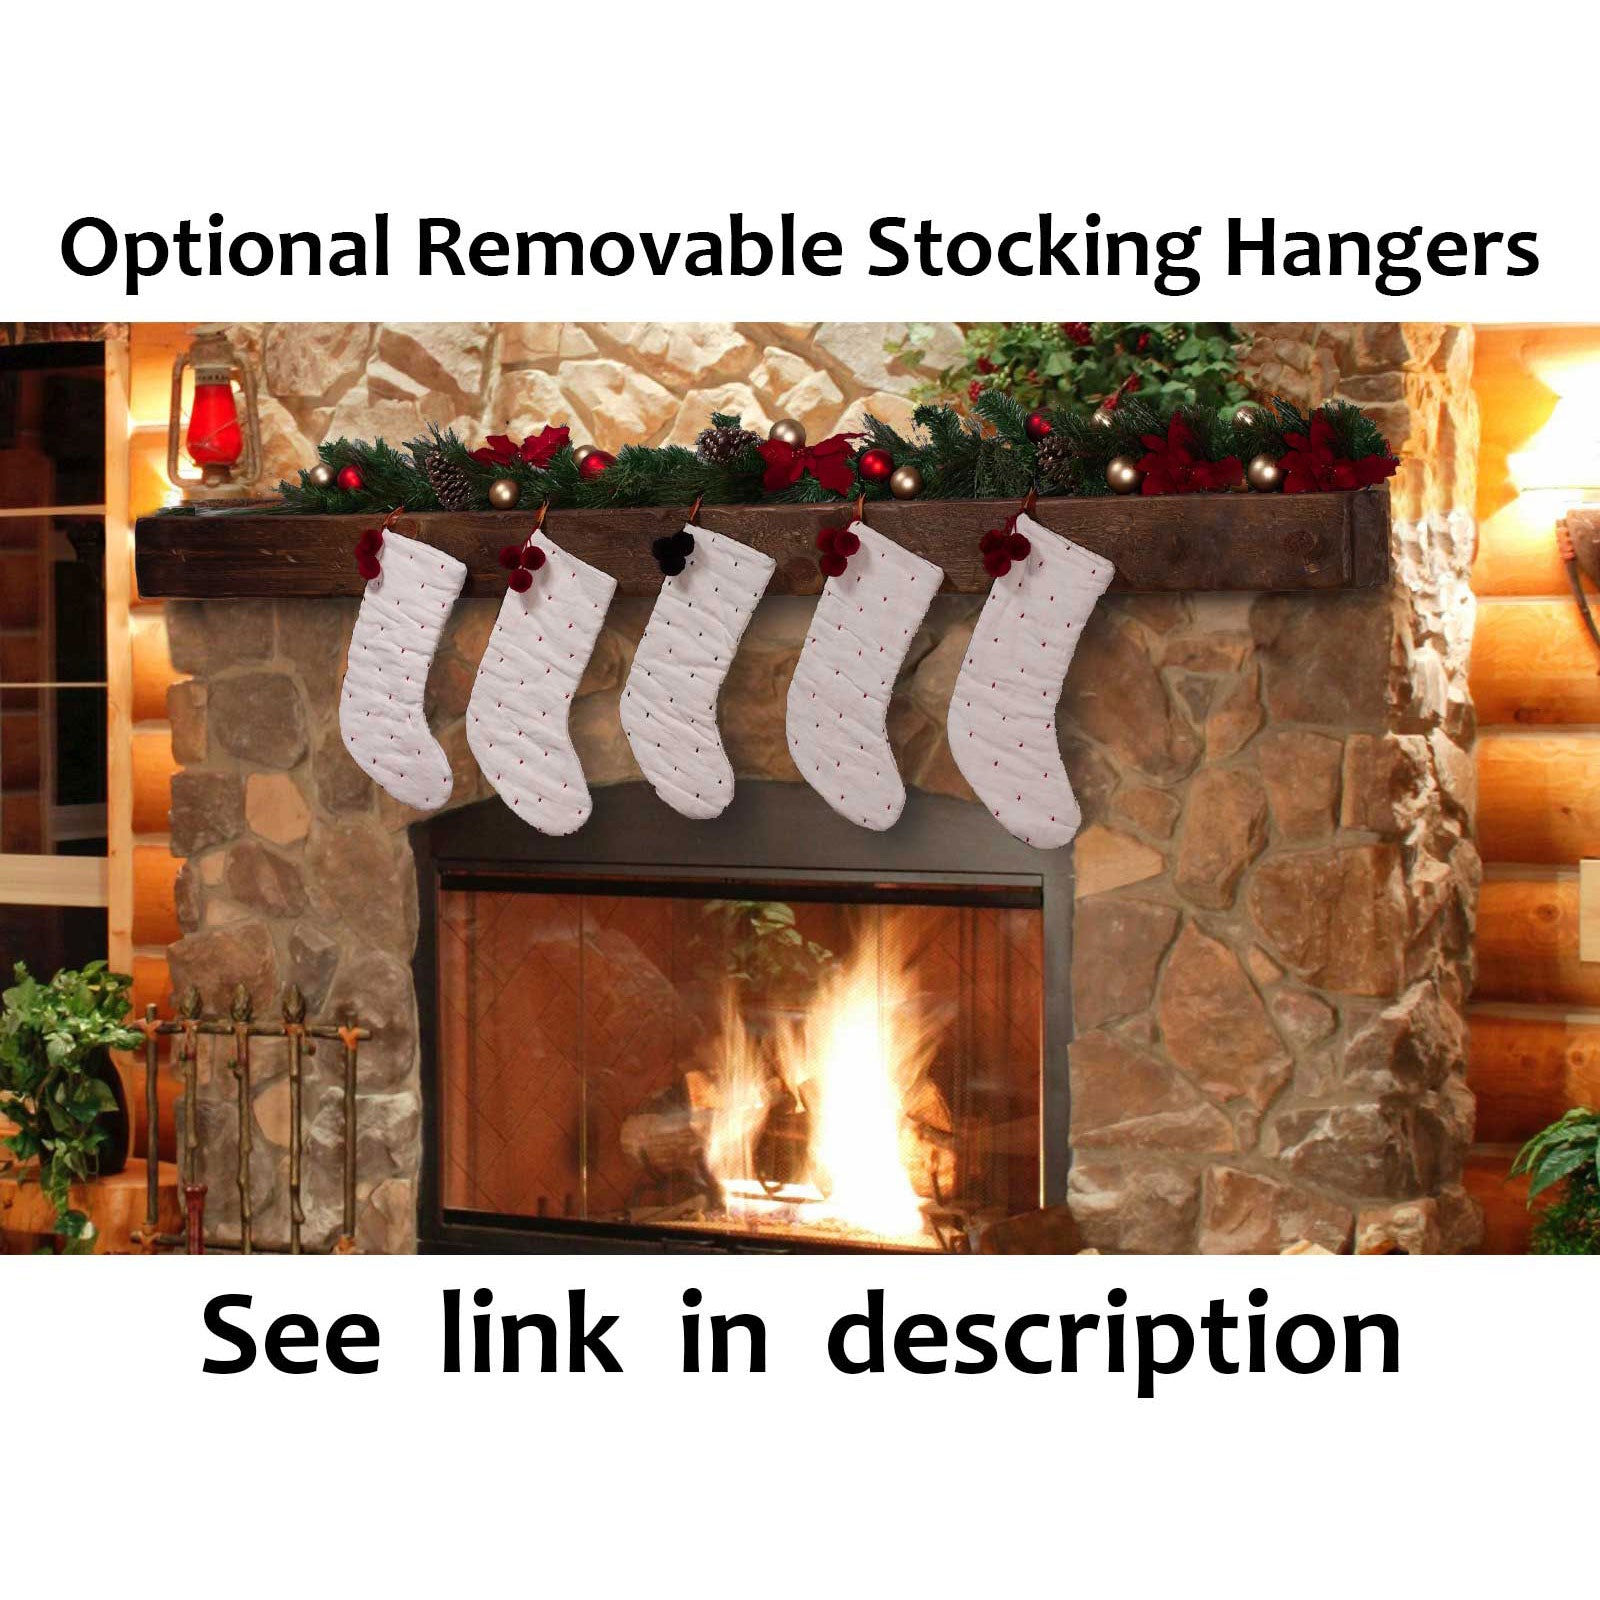 A Christmas fireplace with stockings hanging on the mantel